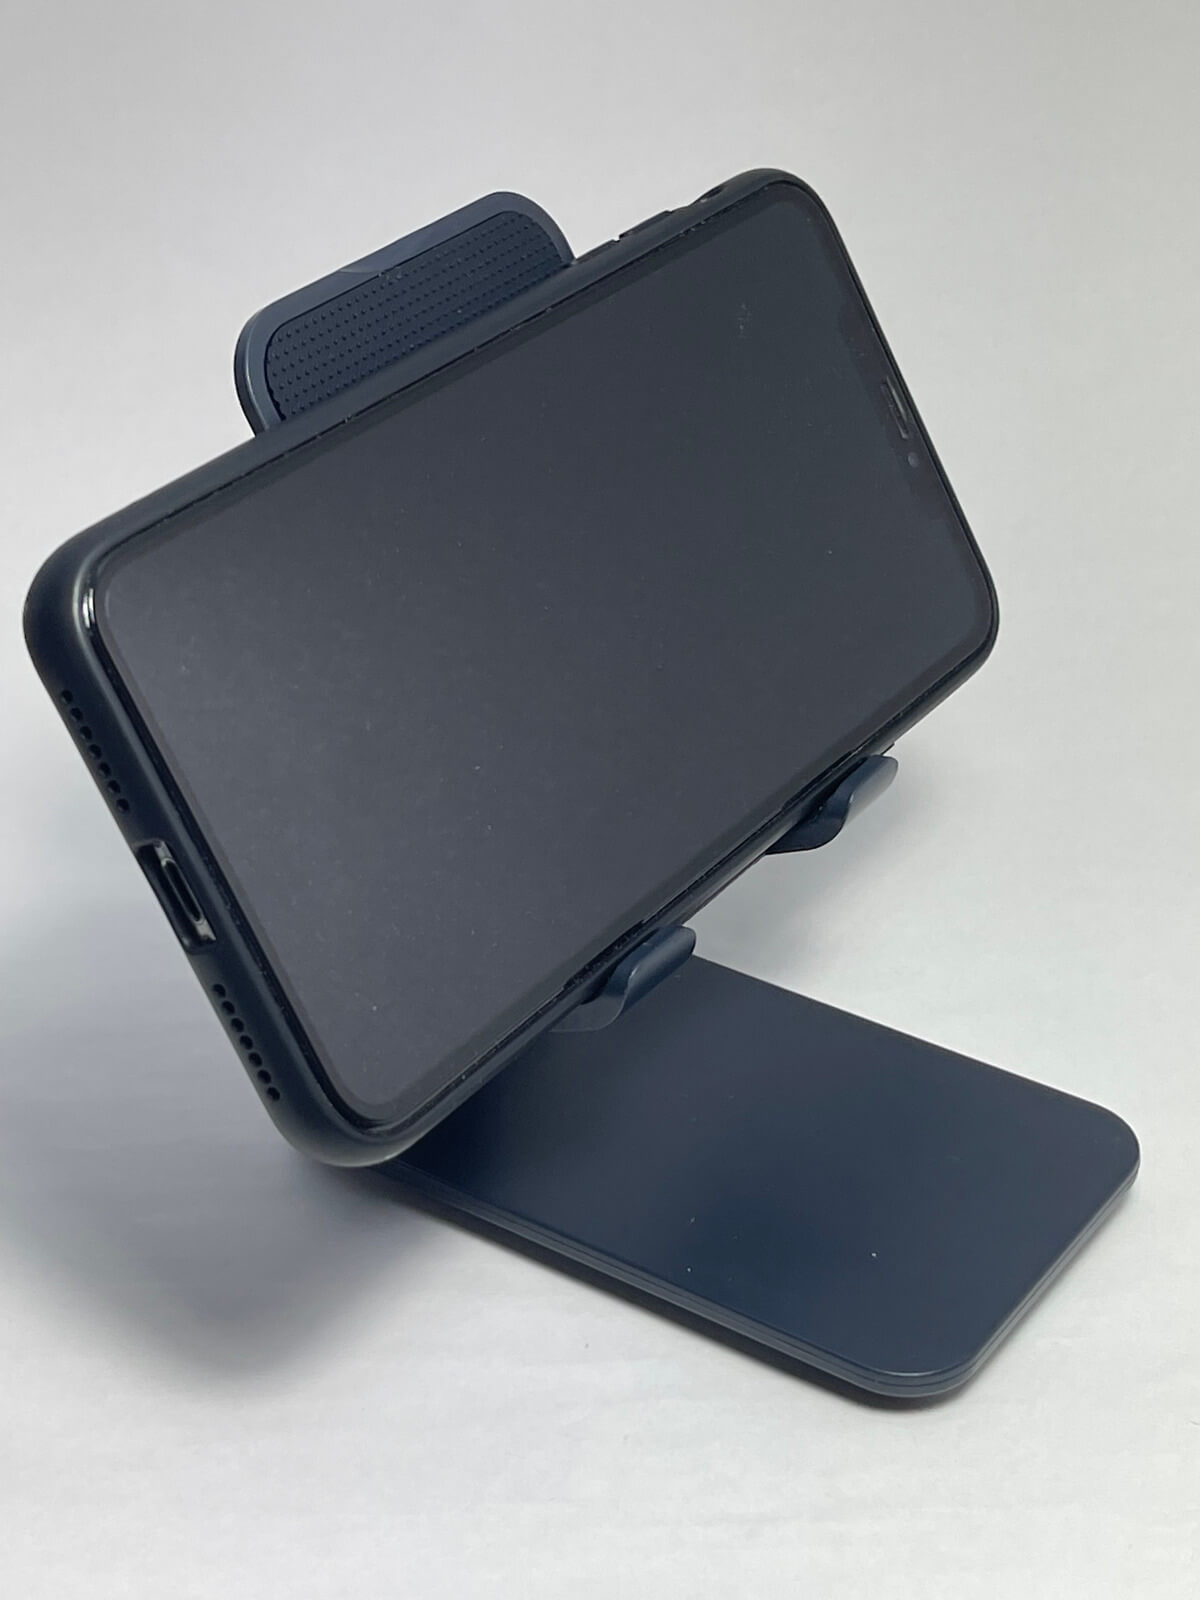 iphone12-stand-01-photo-009